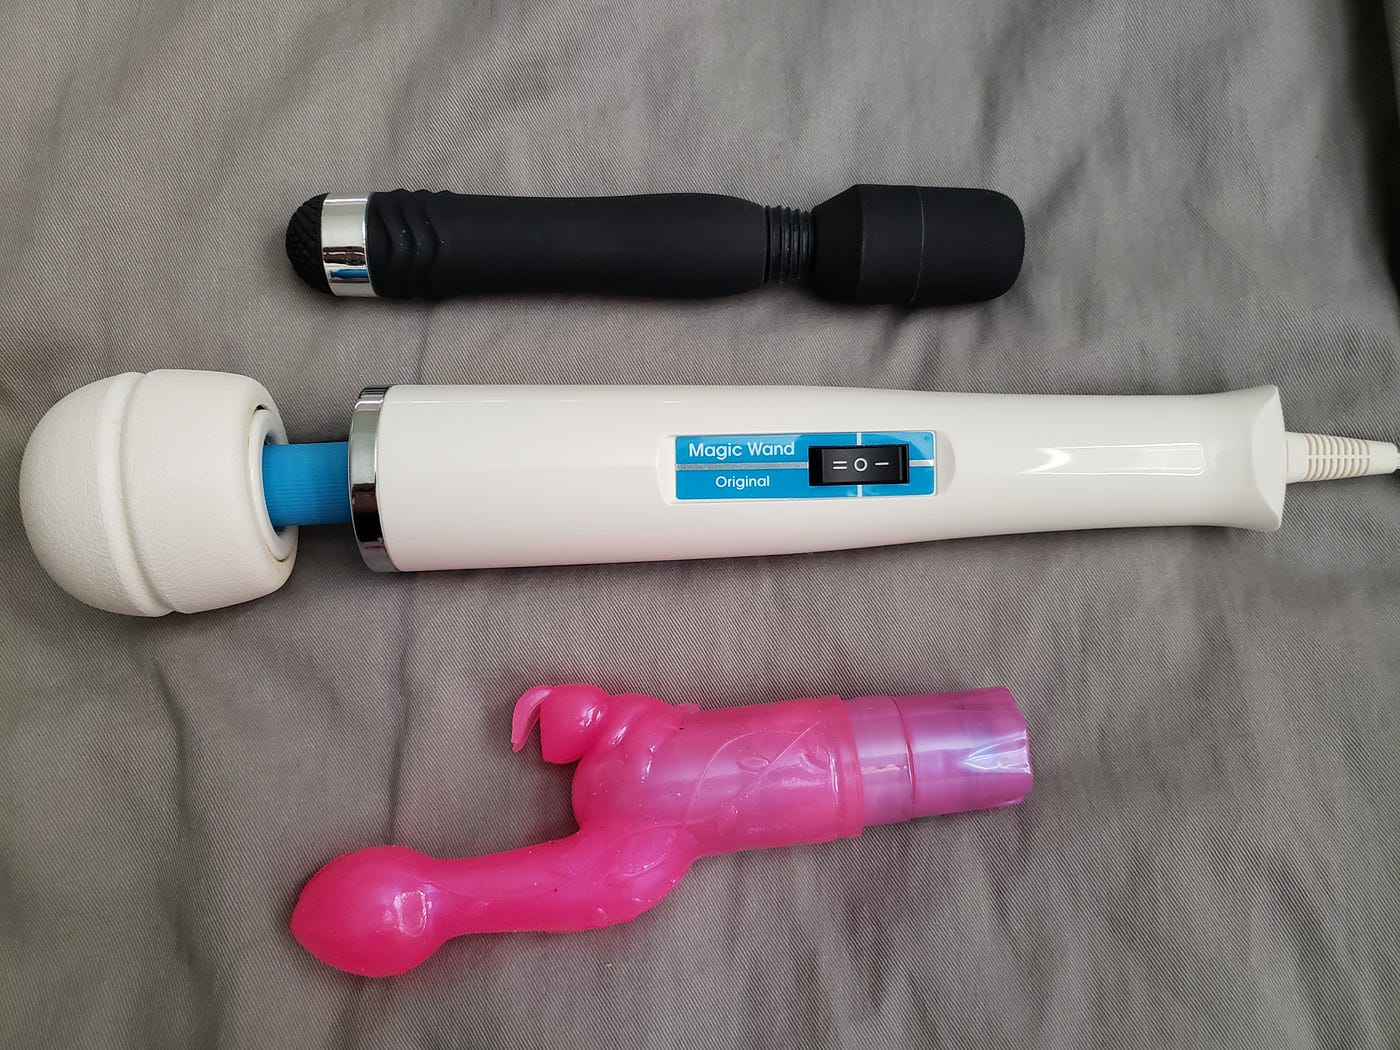 how to address wifes vibrator